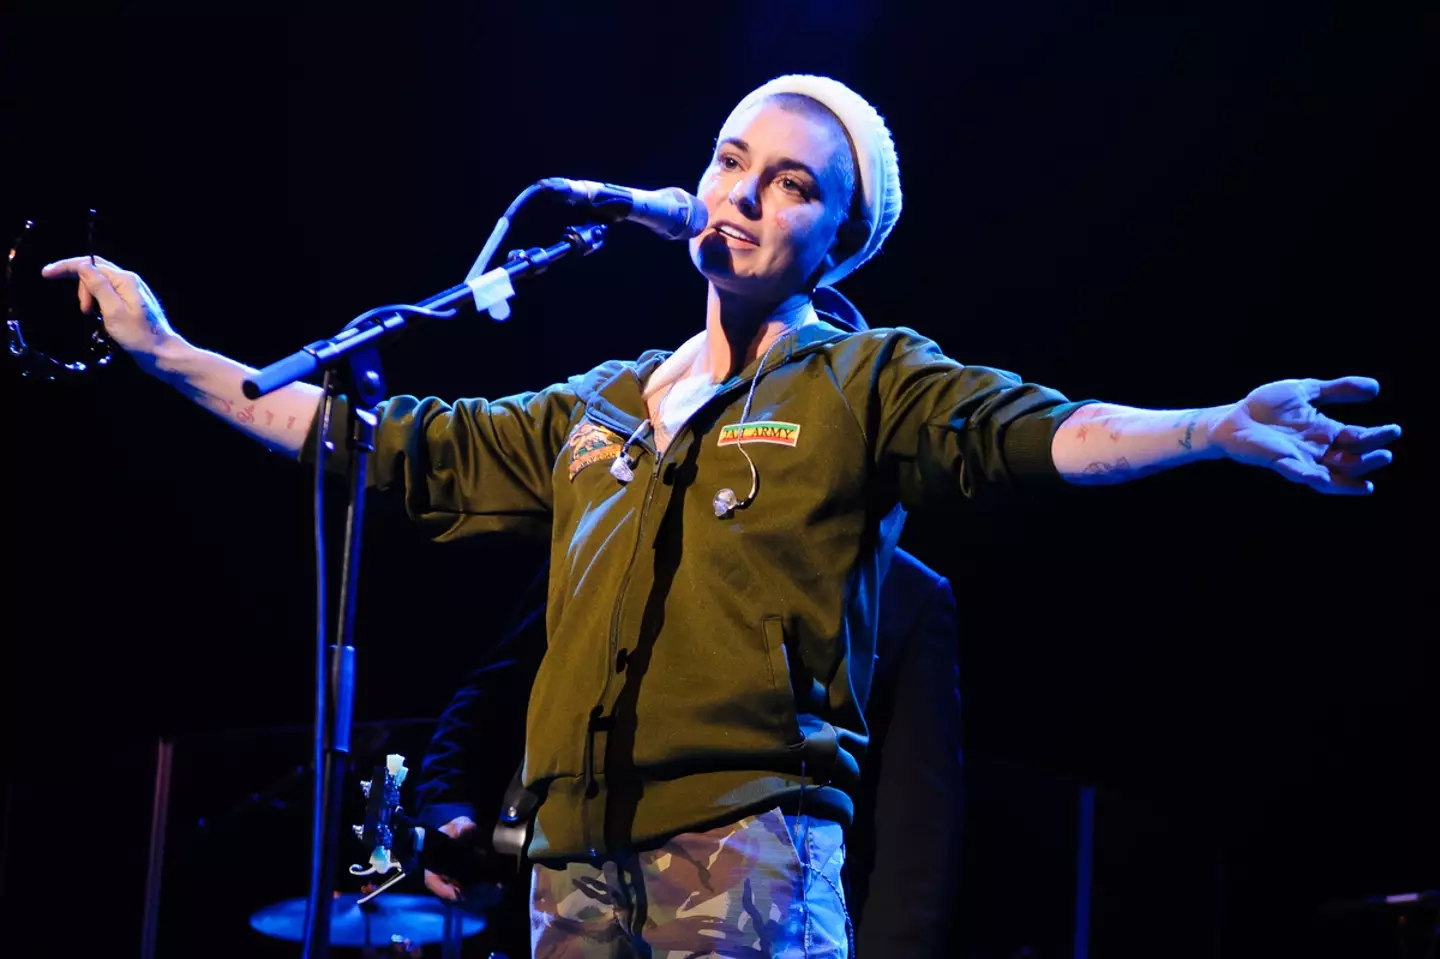 Sinéad O'Connor had expressed concerns about people stalking her online.